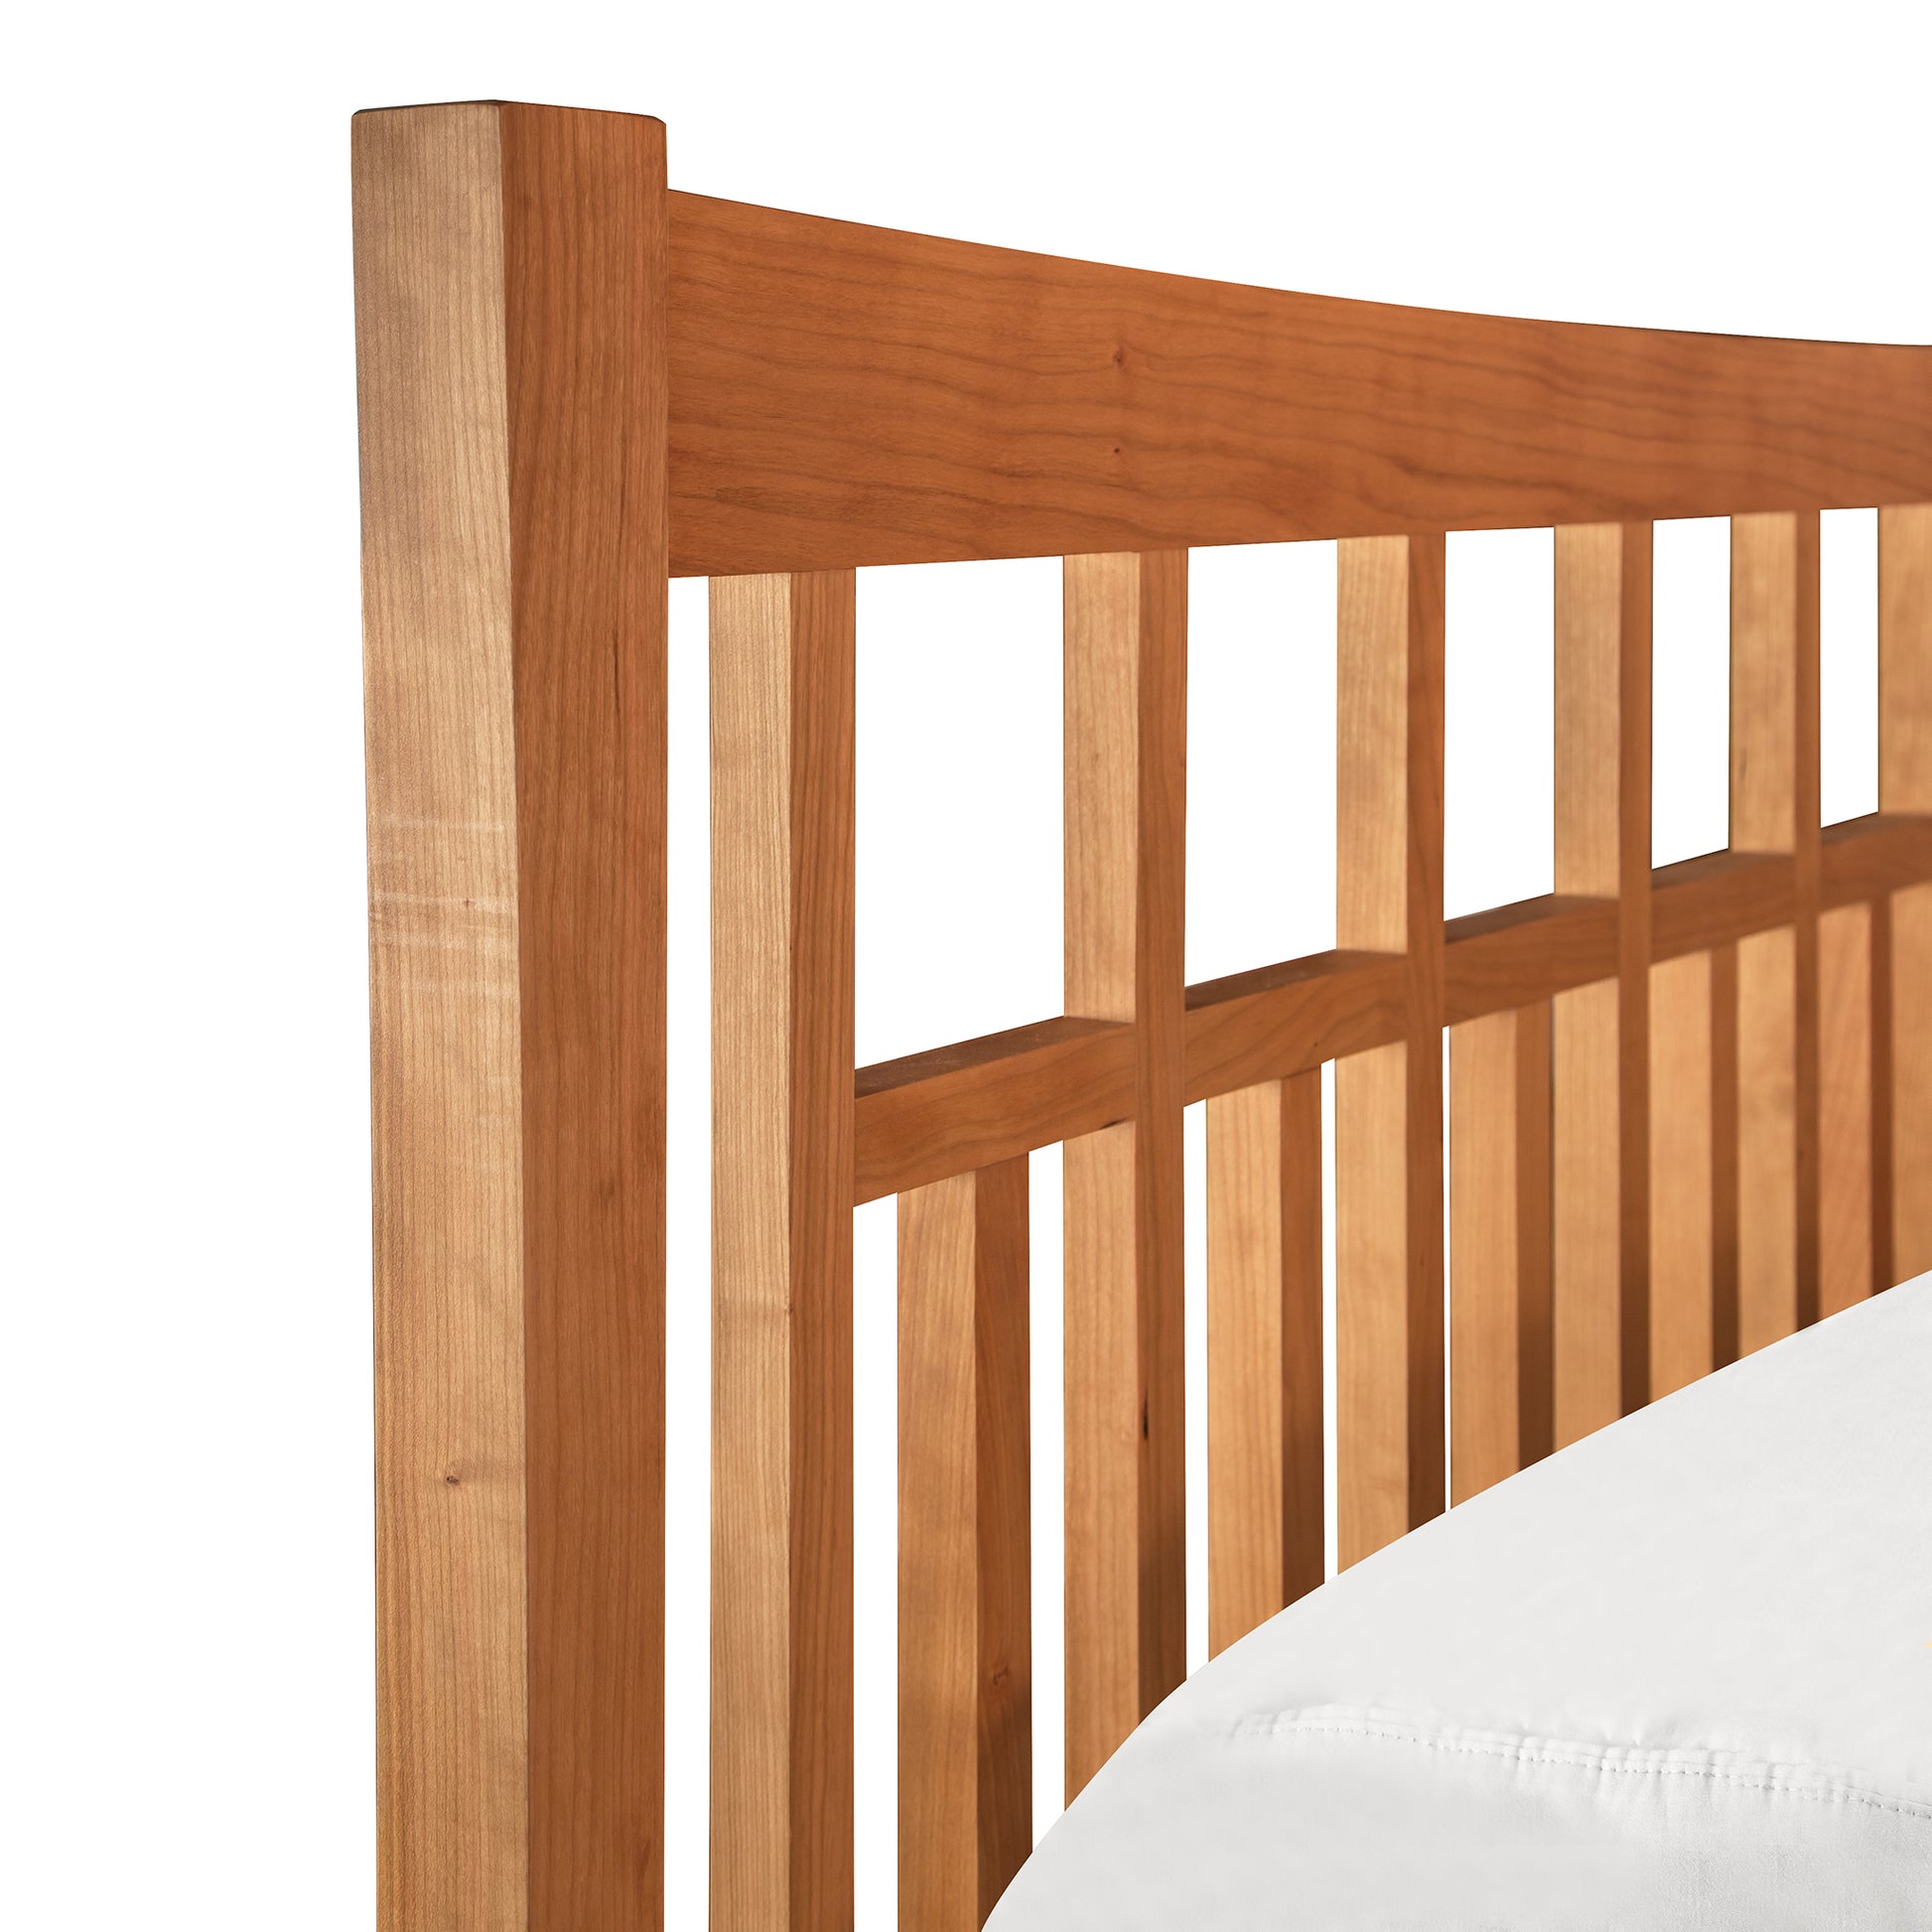 Contemporary Craftsman Low Footboard Platform Bed headboard with vertical slats on a white background has been replaced with:
Vermont Furniture Designs' Contemporary Craftsman Low Footboard Bed with vertical slats on a white background.